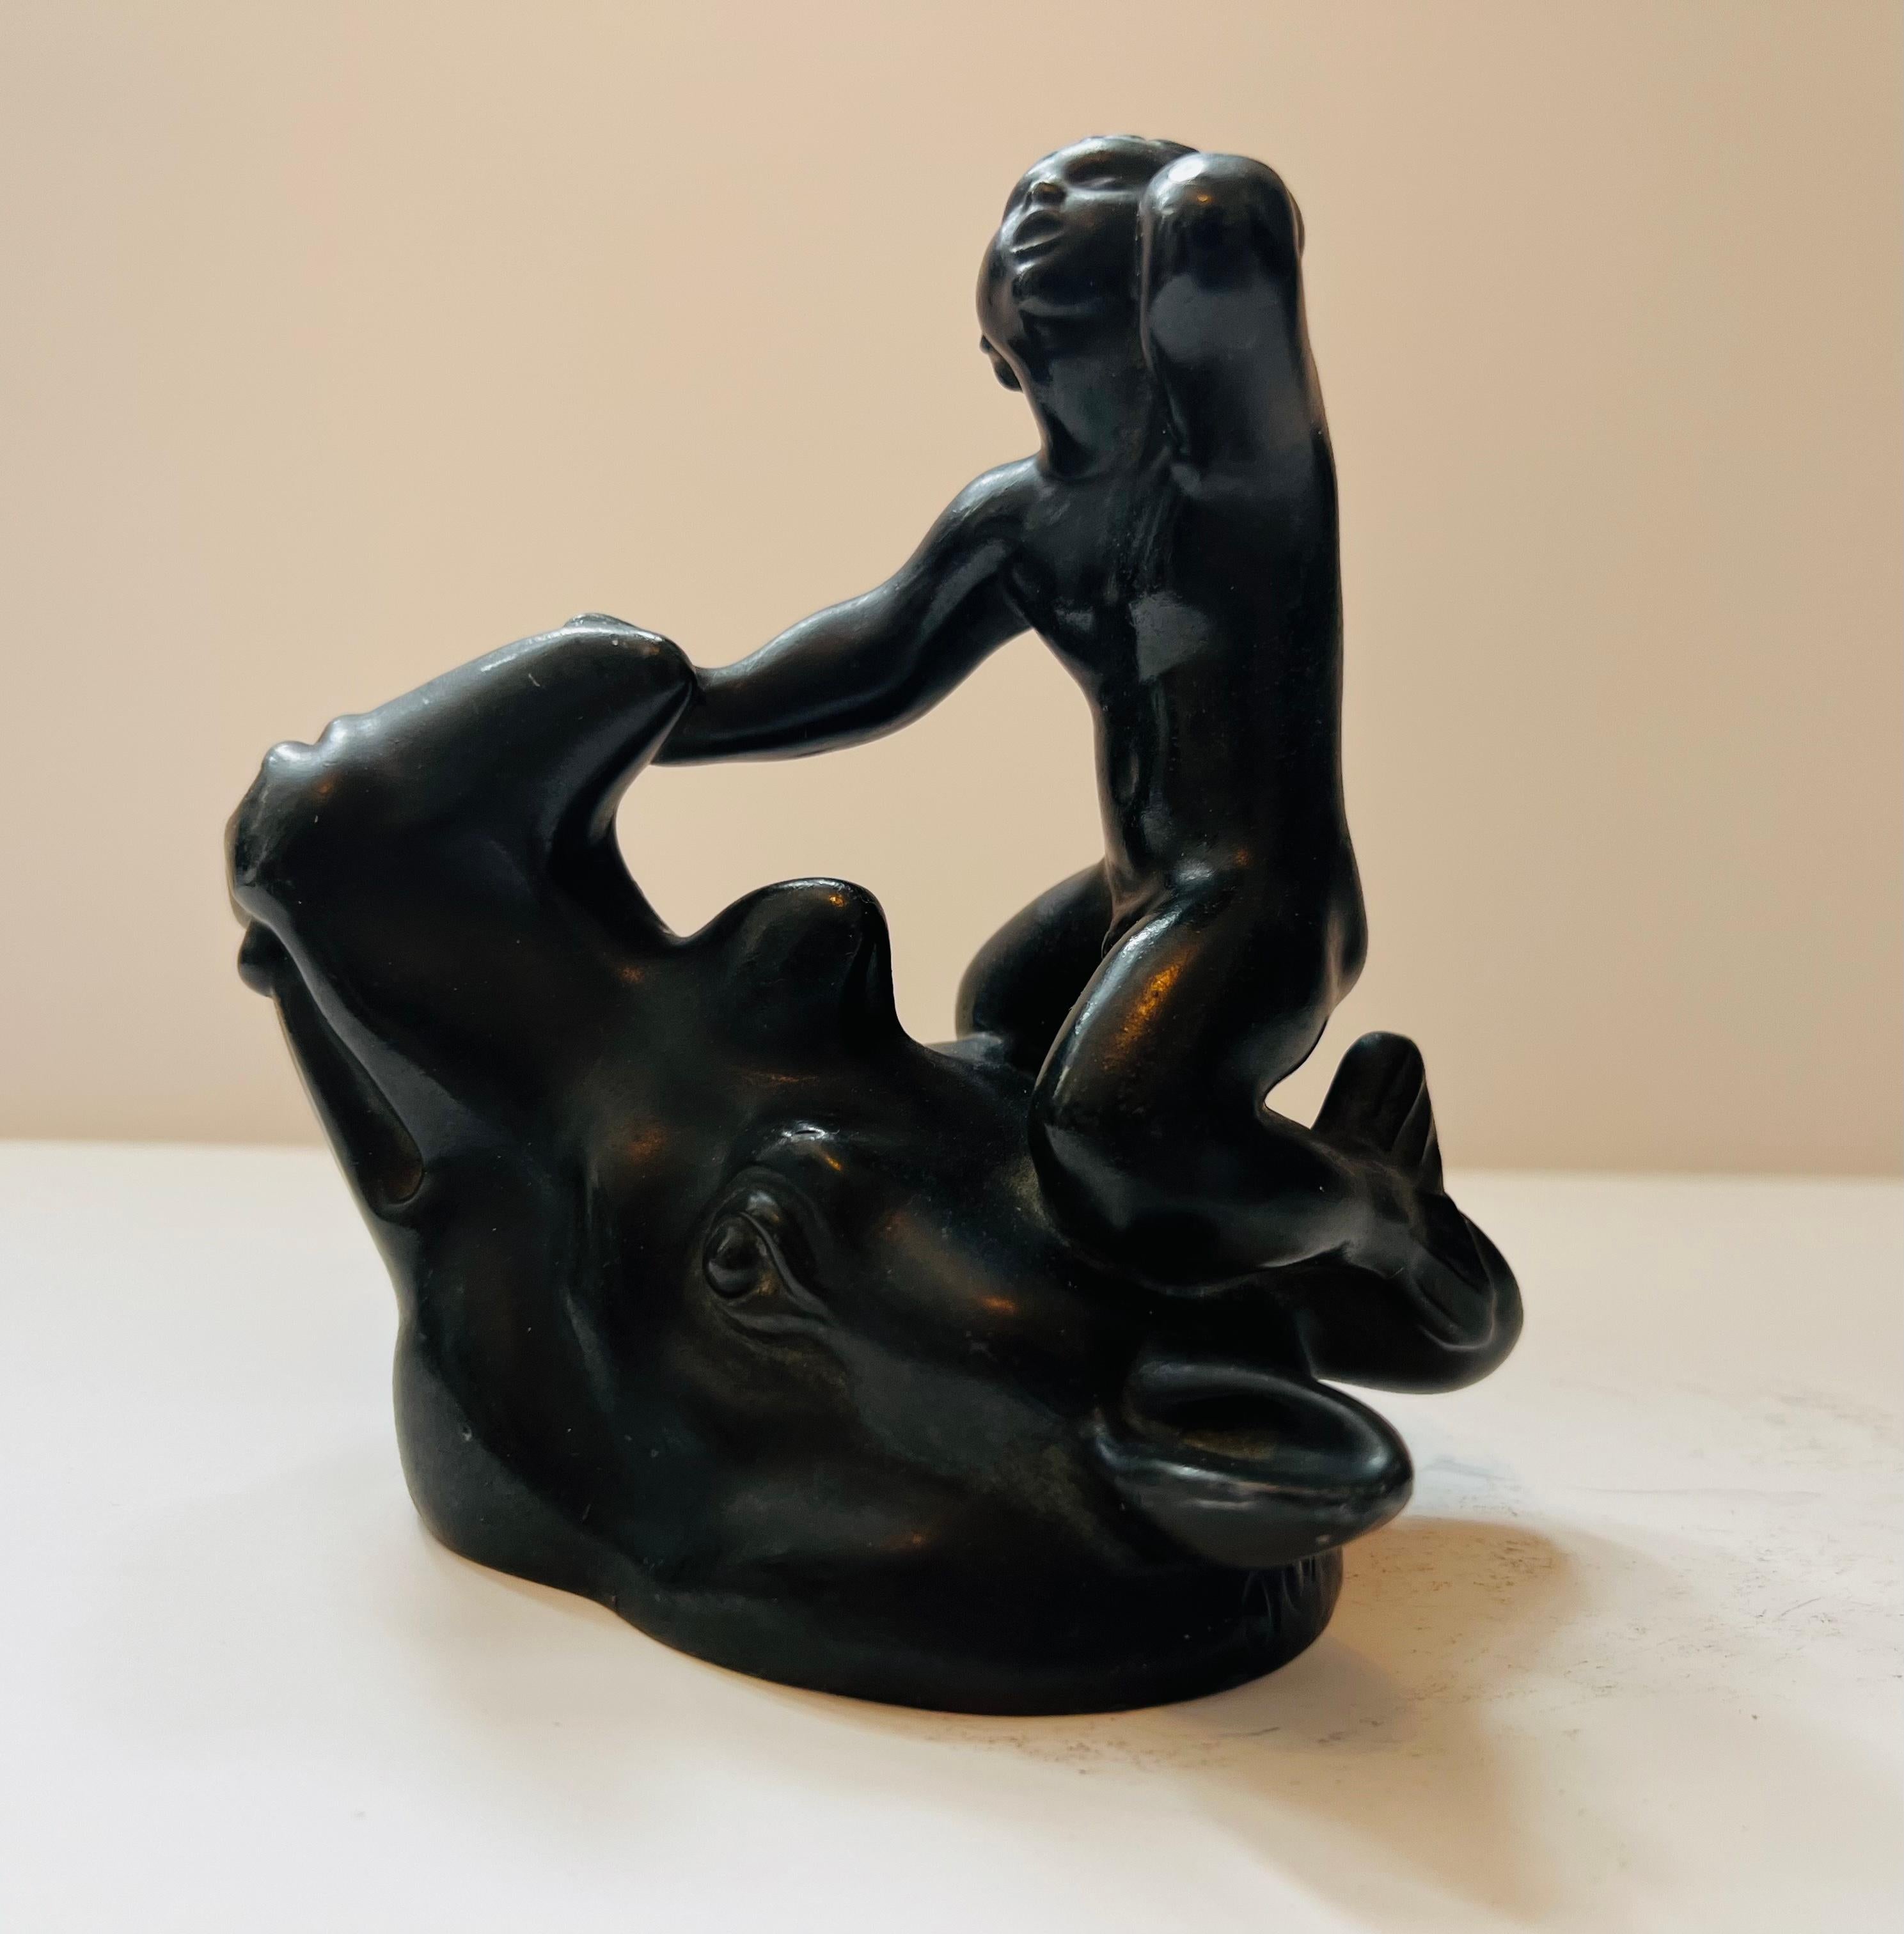 A rare Jus Andersen sculpture or paperweight in patinated bronze called “Disko” of a Merman atop of a rhino head. Signed